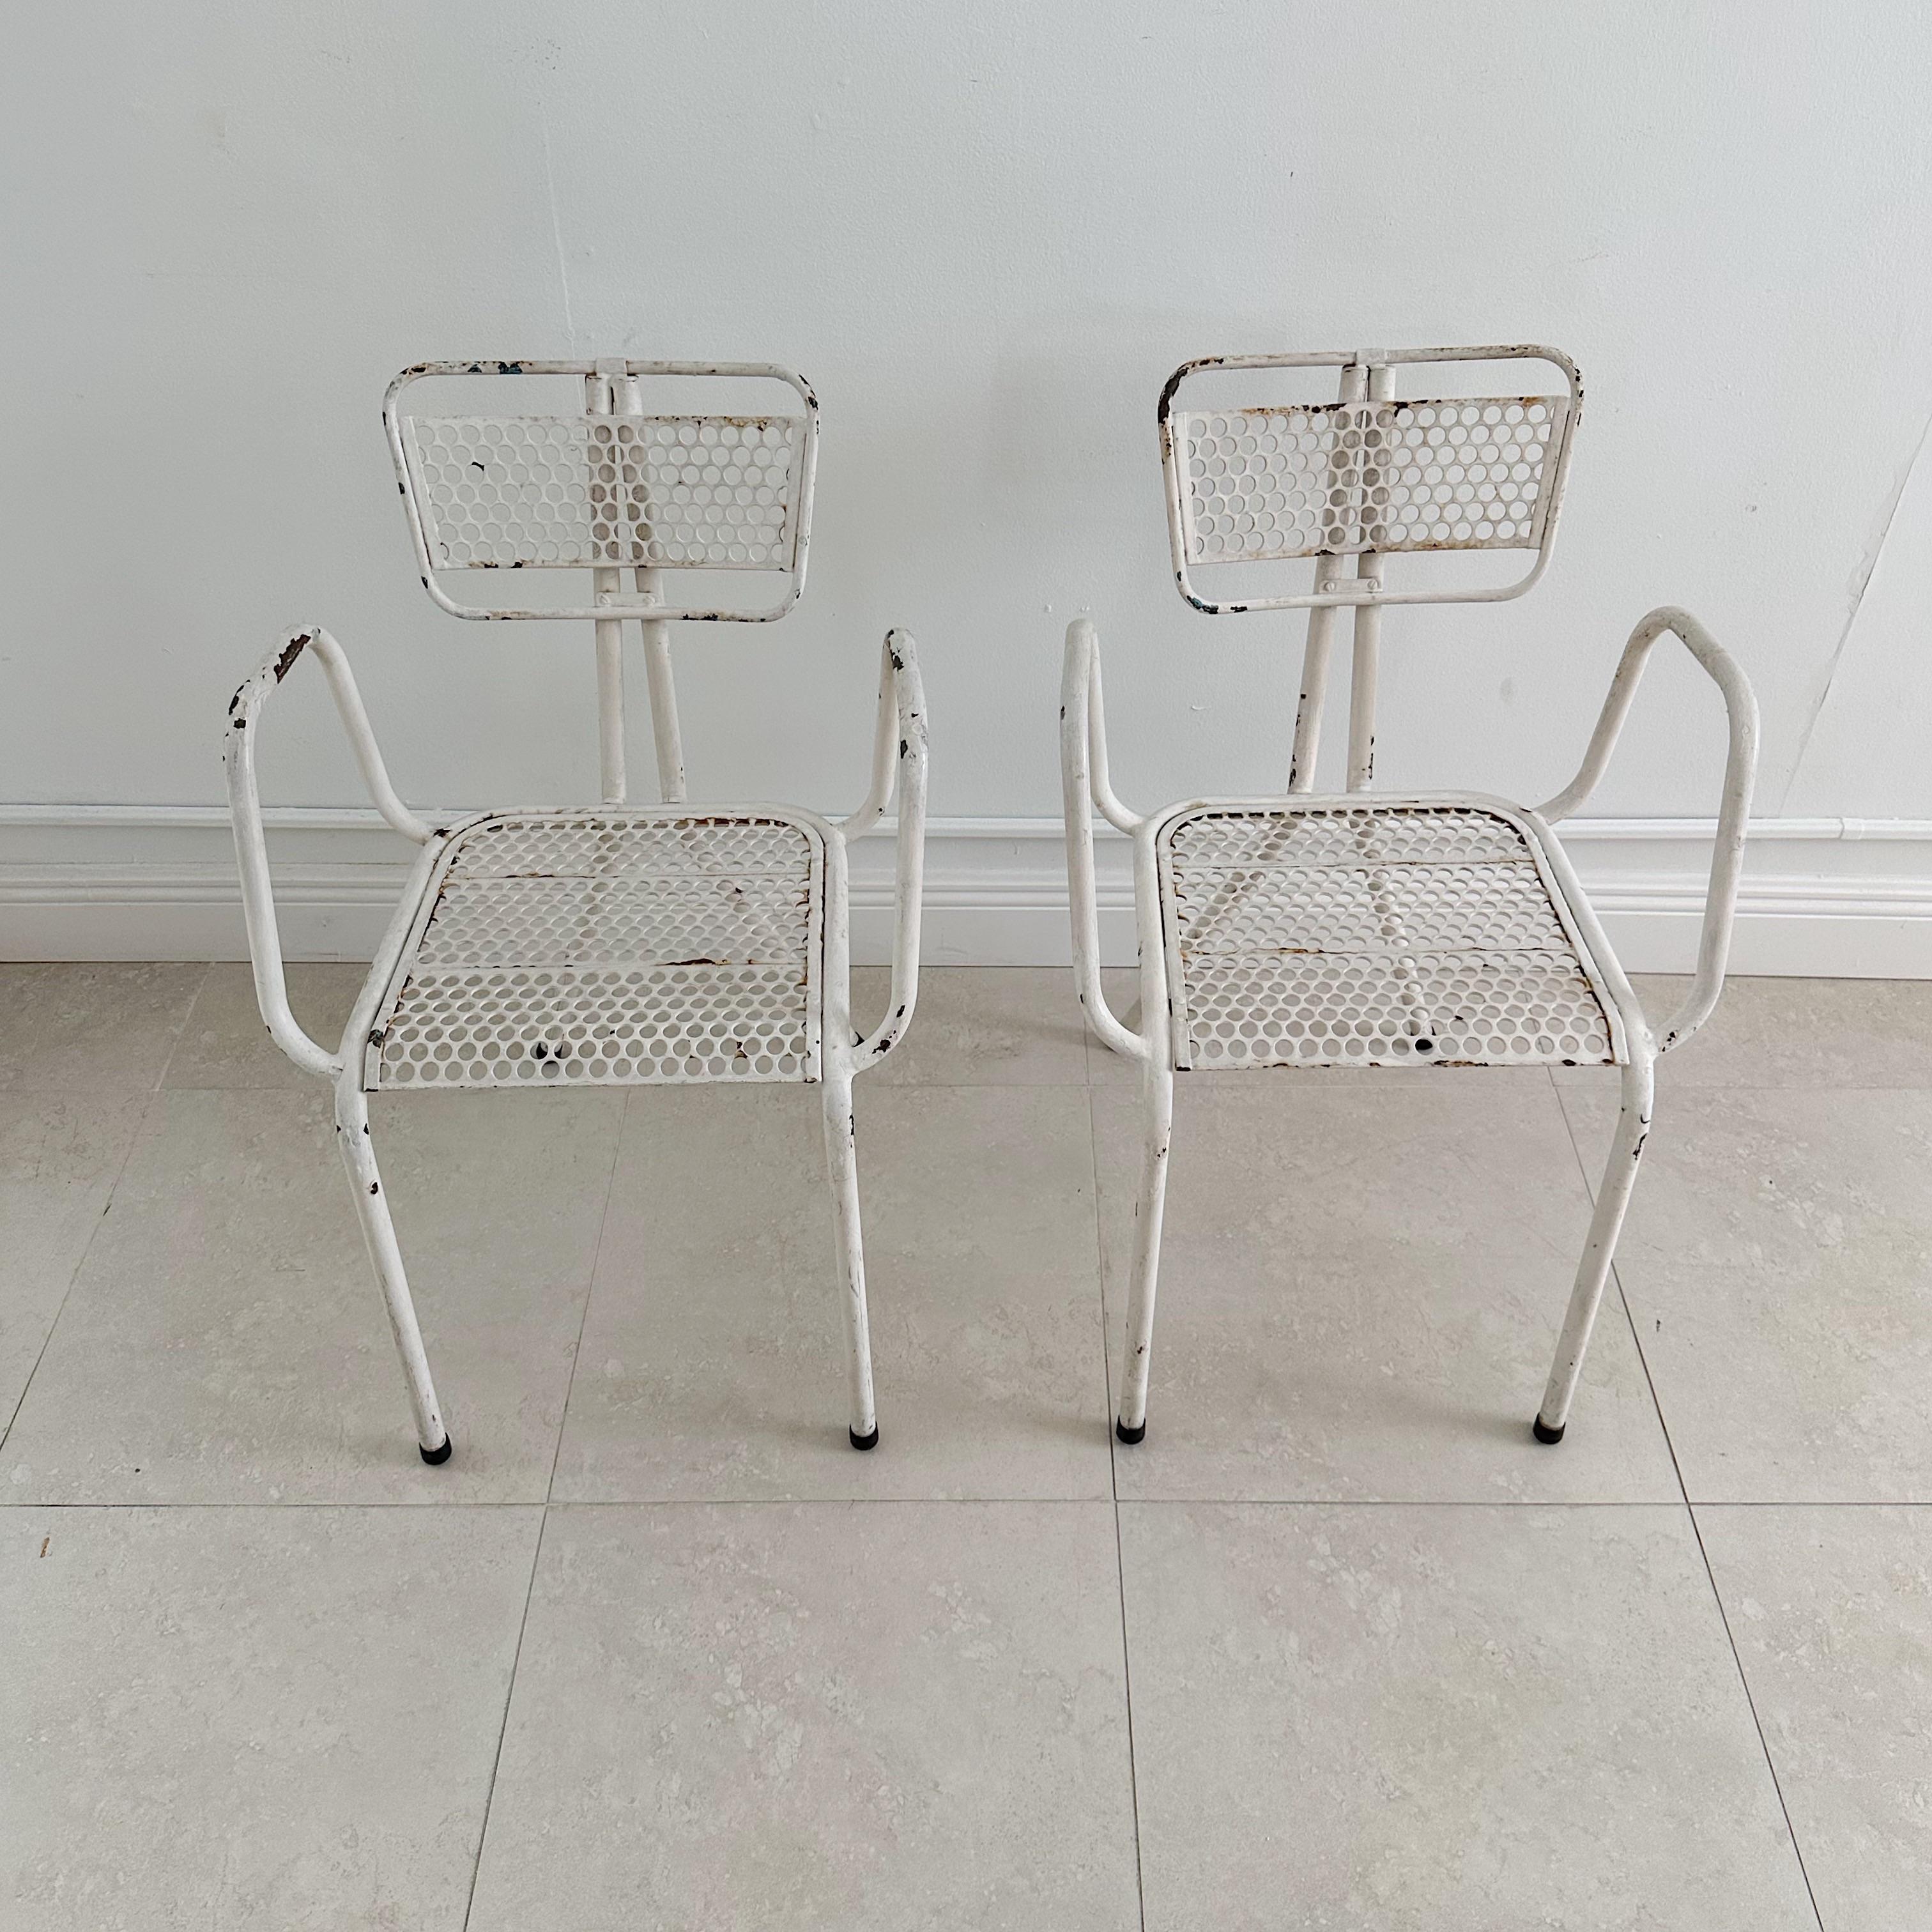 A pair of vintage metal arm chairs designed by René Malaval for Bloc Metal France. Quite rare to find these chairs with arms.  These post-war chairs feature a painted white finish with perforated metal backrests and seats. The chairs retain the old